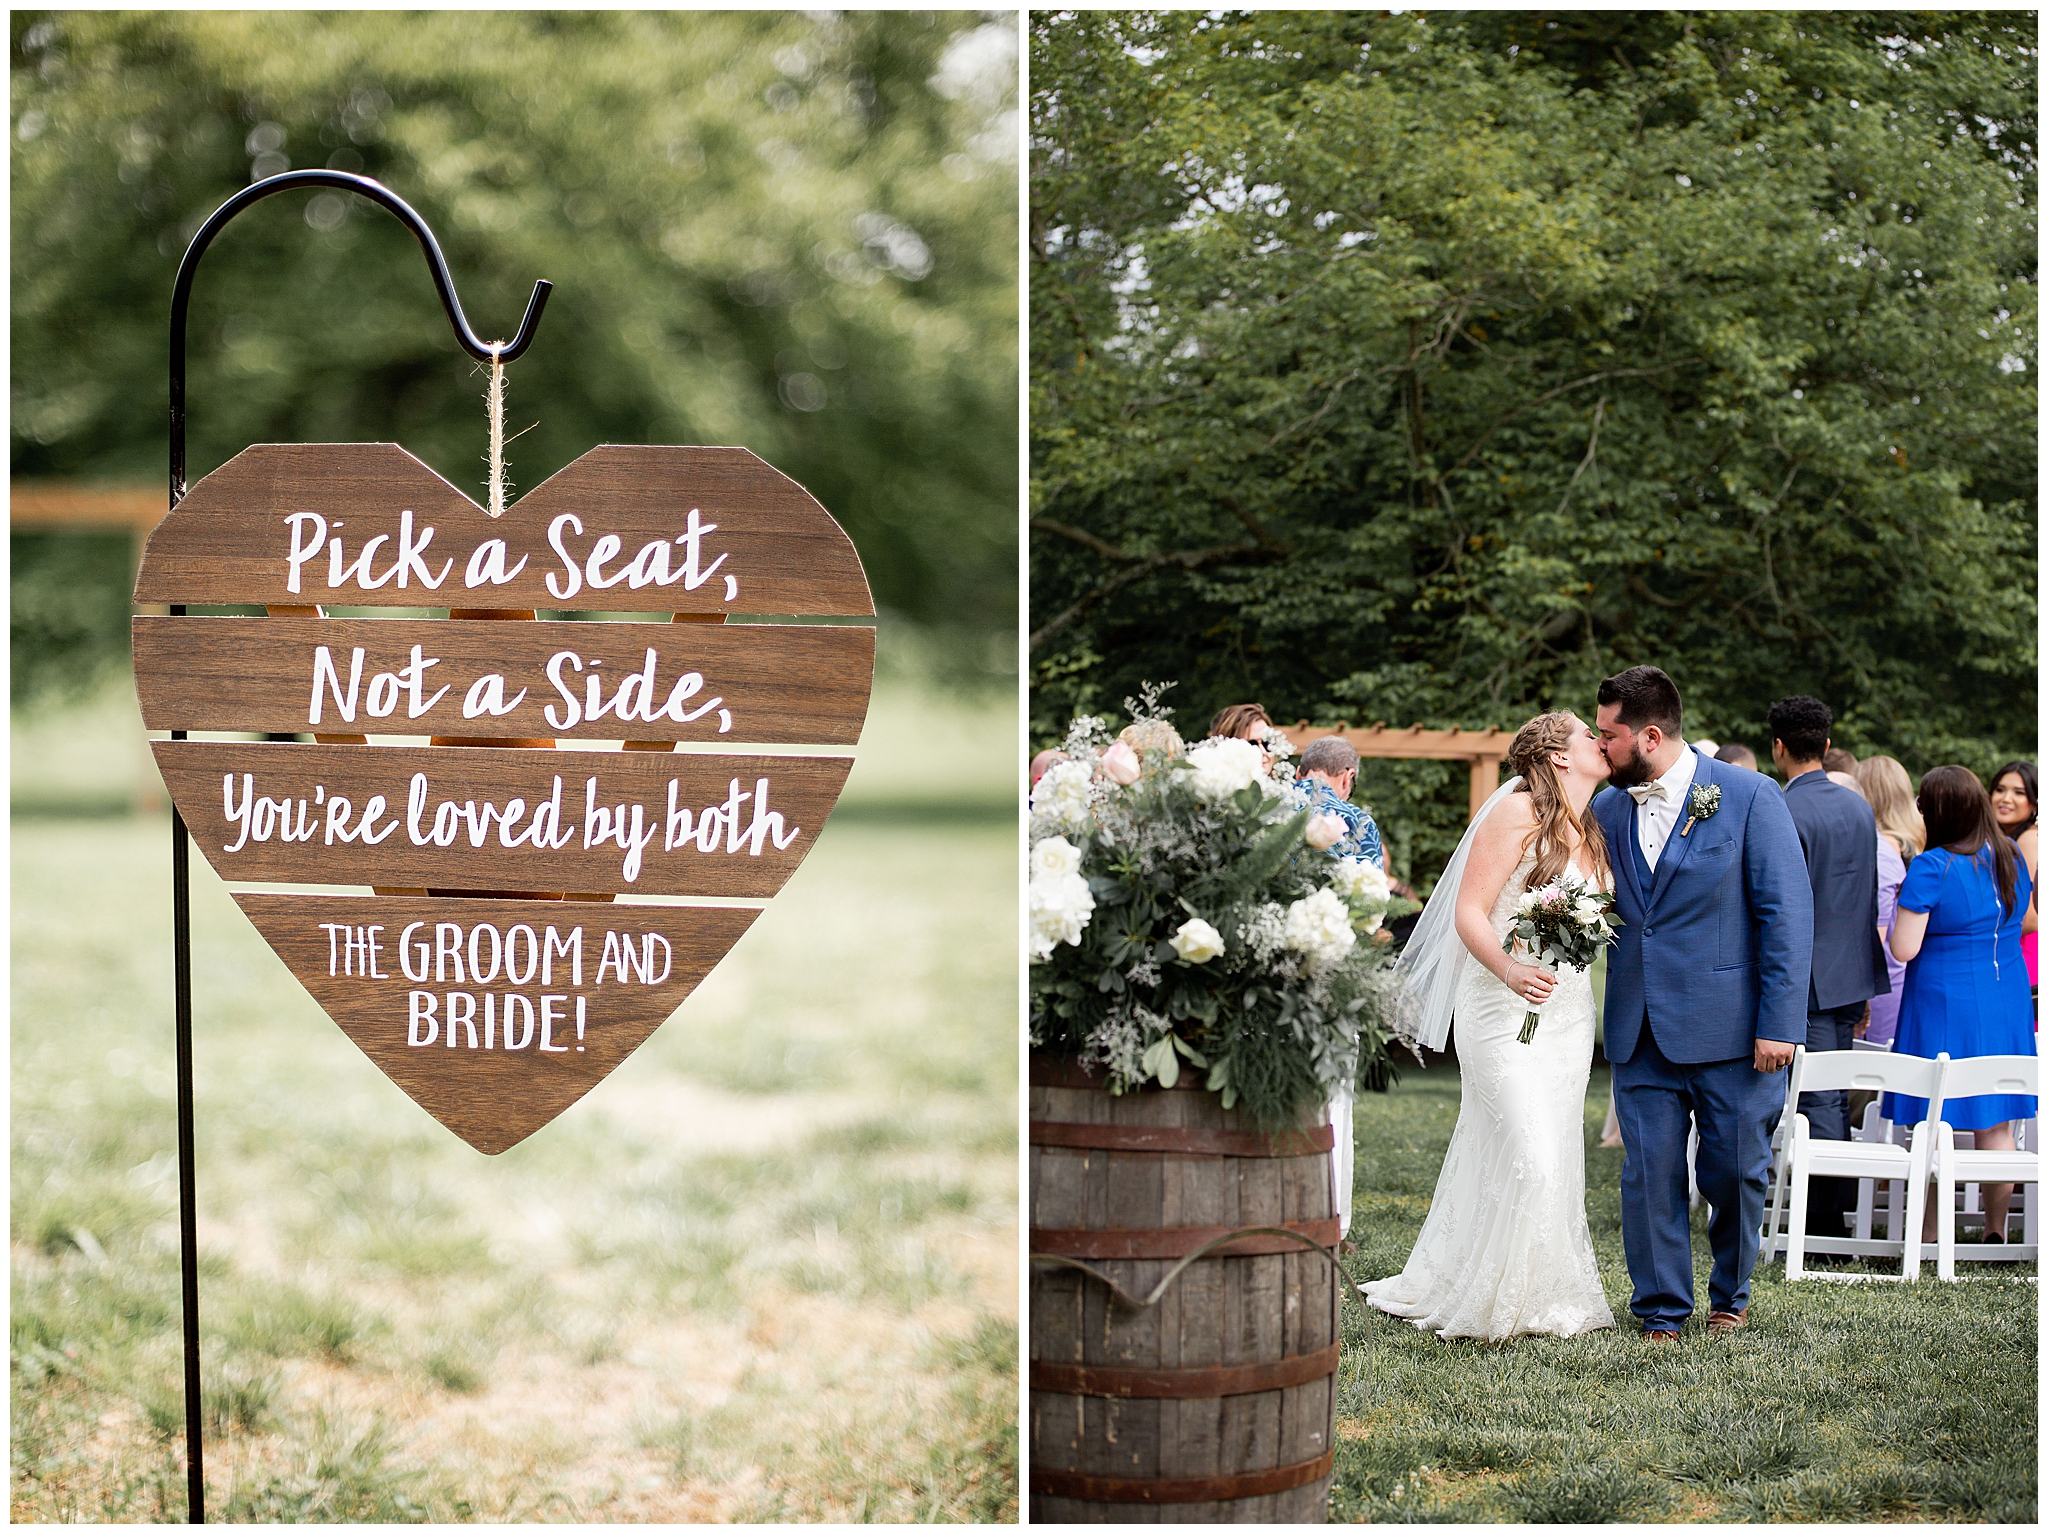 Choose a seat not a side wedding ceremony sign - rustic wedding